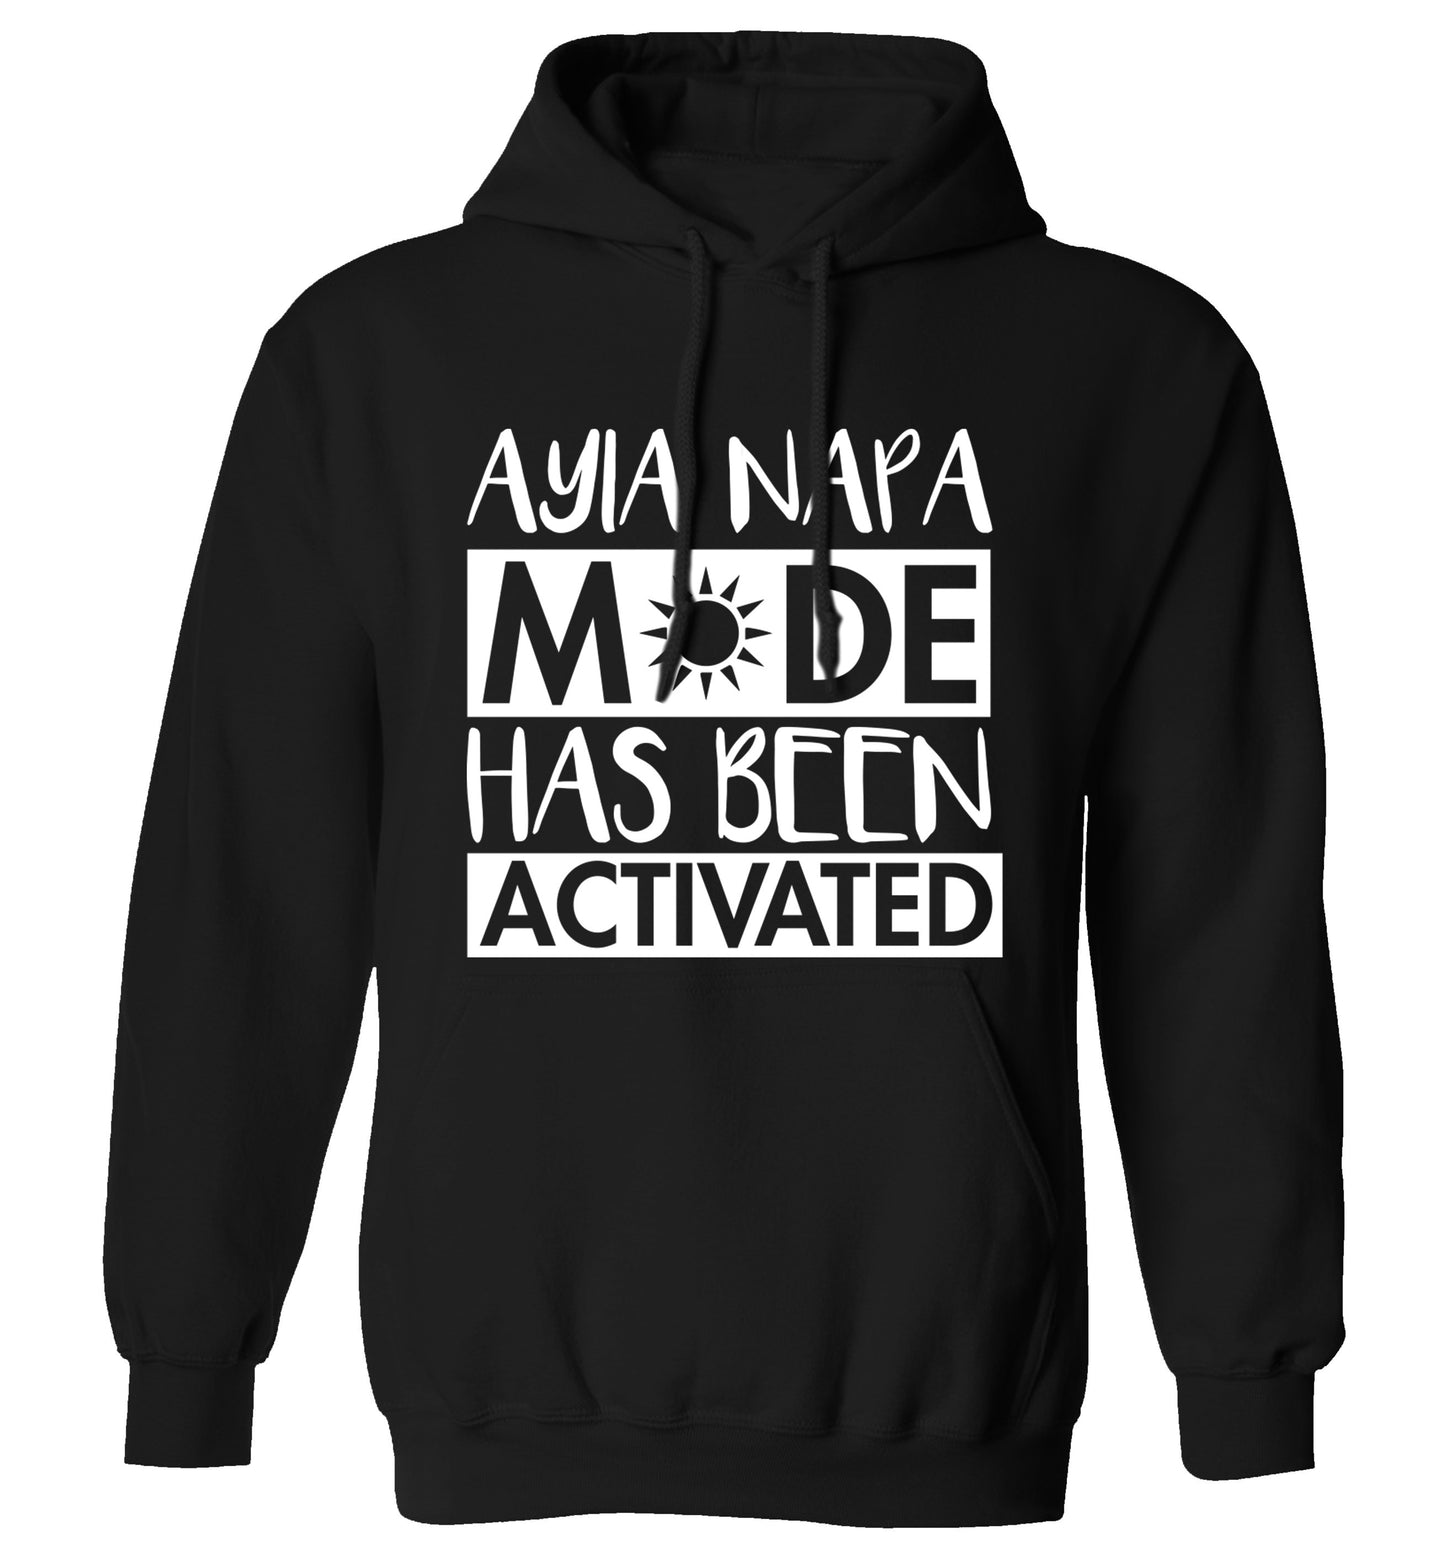 Aiya Napa mode has been activated adults unisex black hoodie 2XL